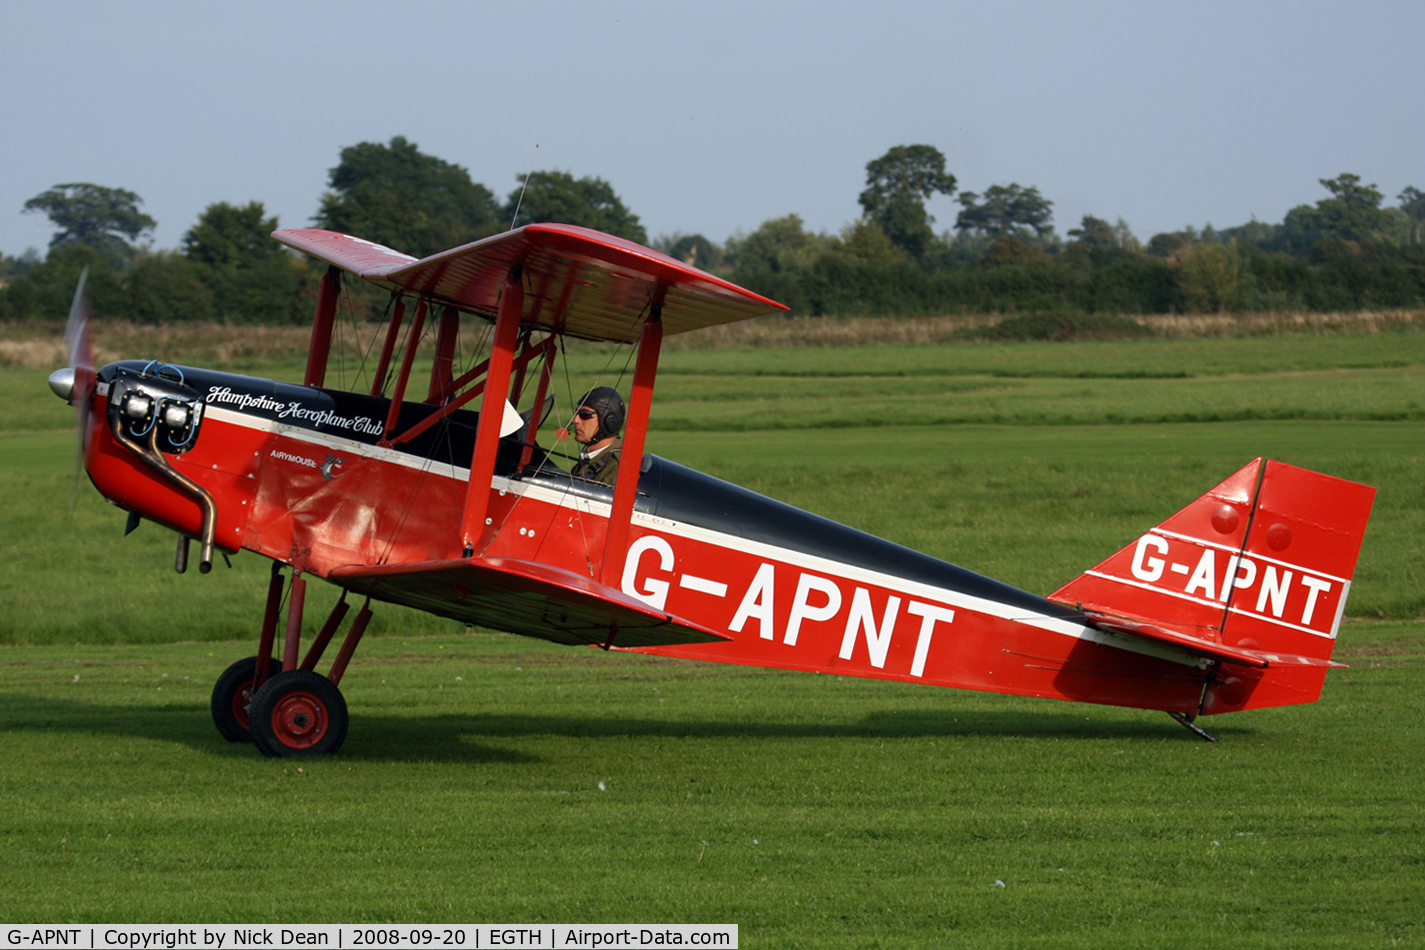 G-APNT, 1958 Currie Wot C/N P6399, Old Warden